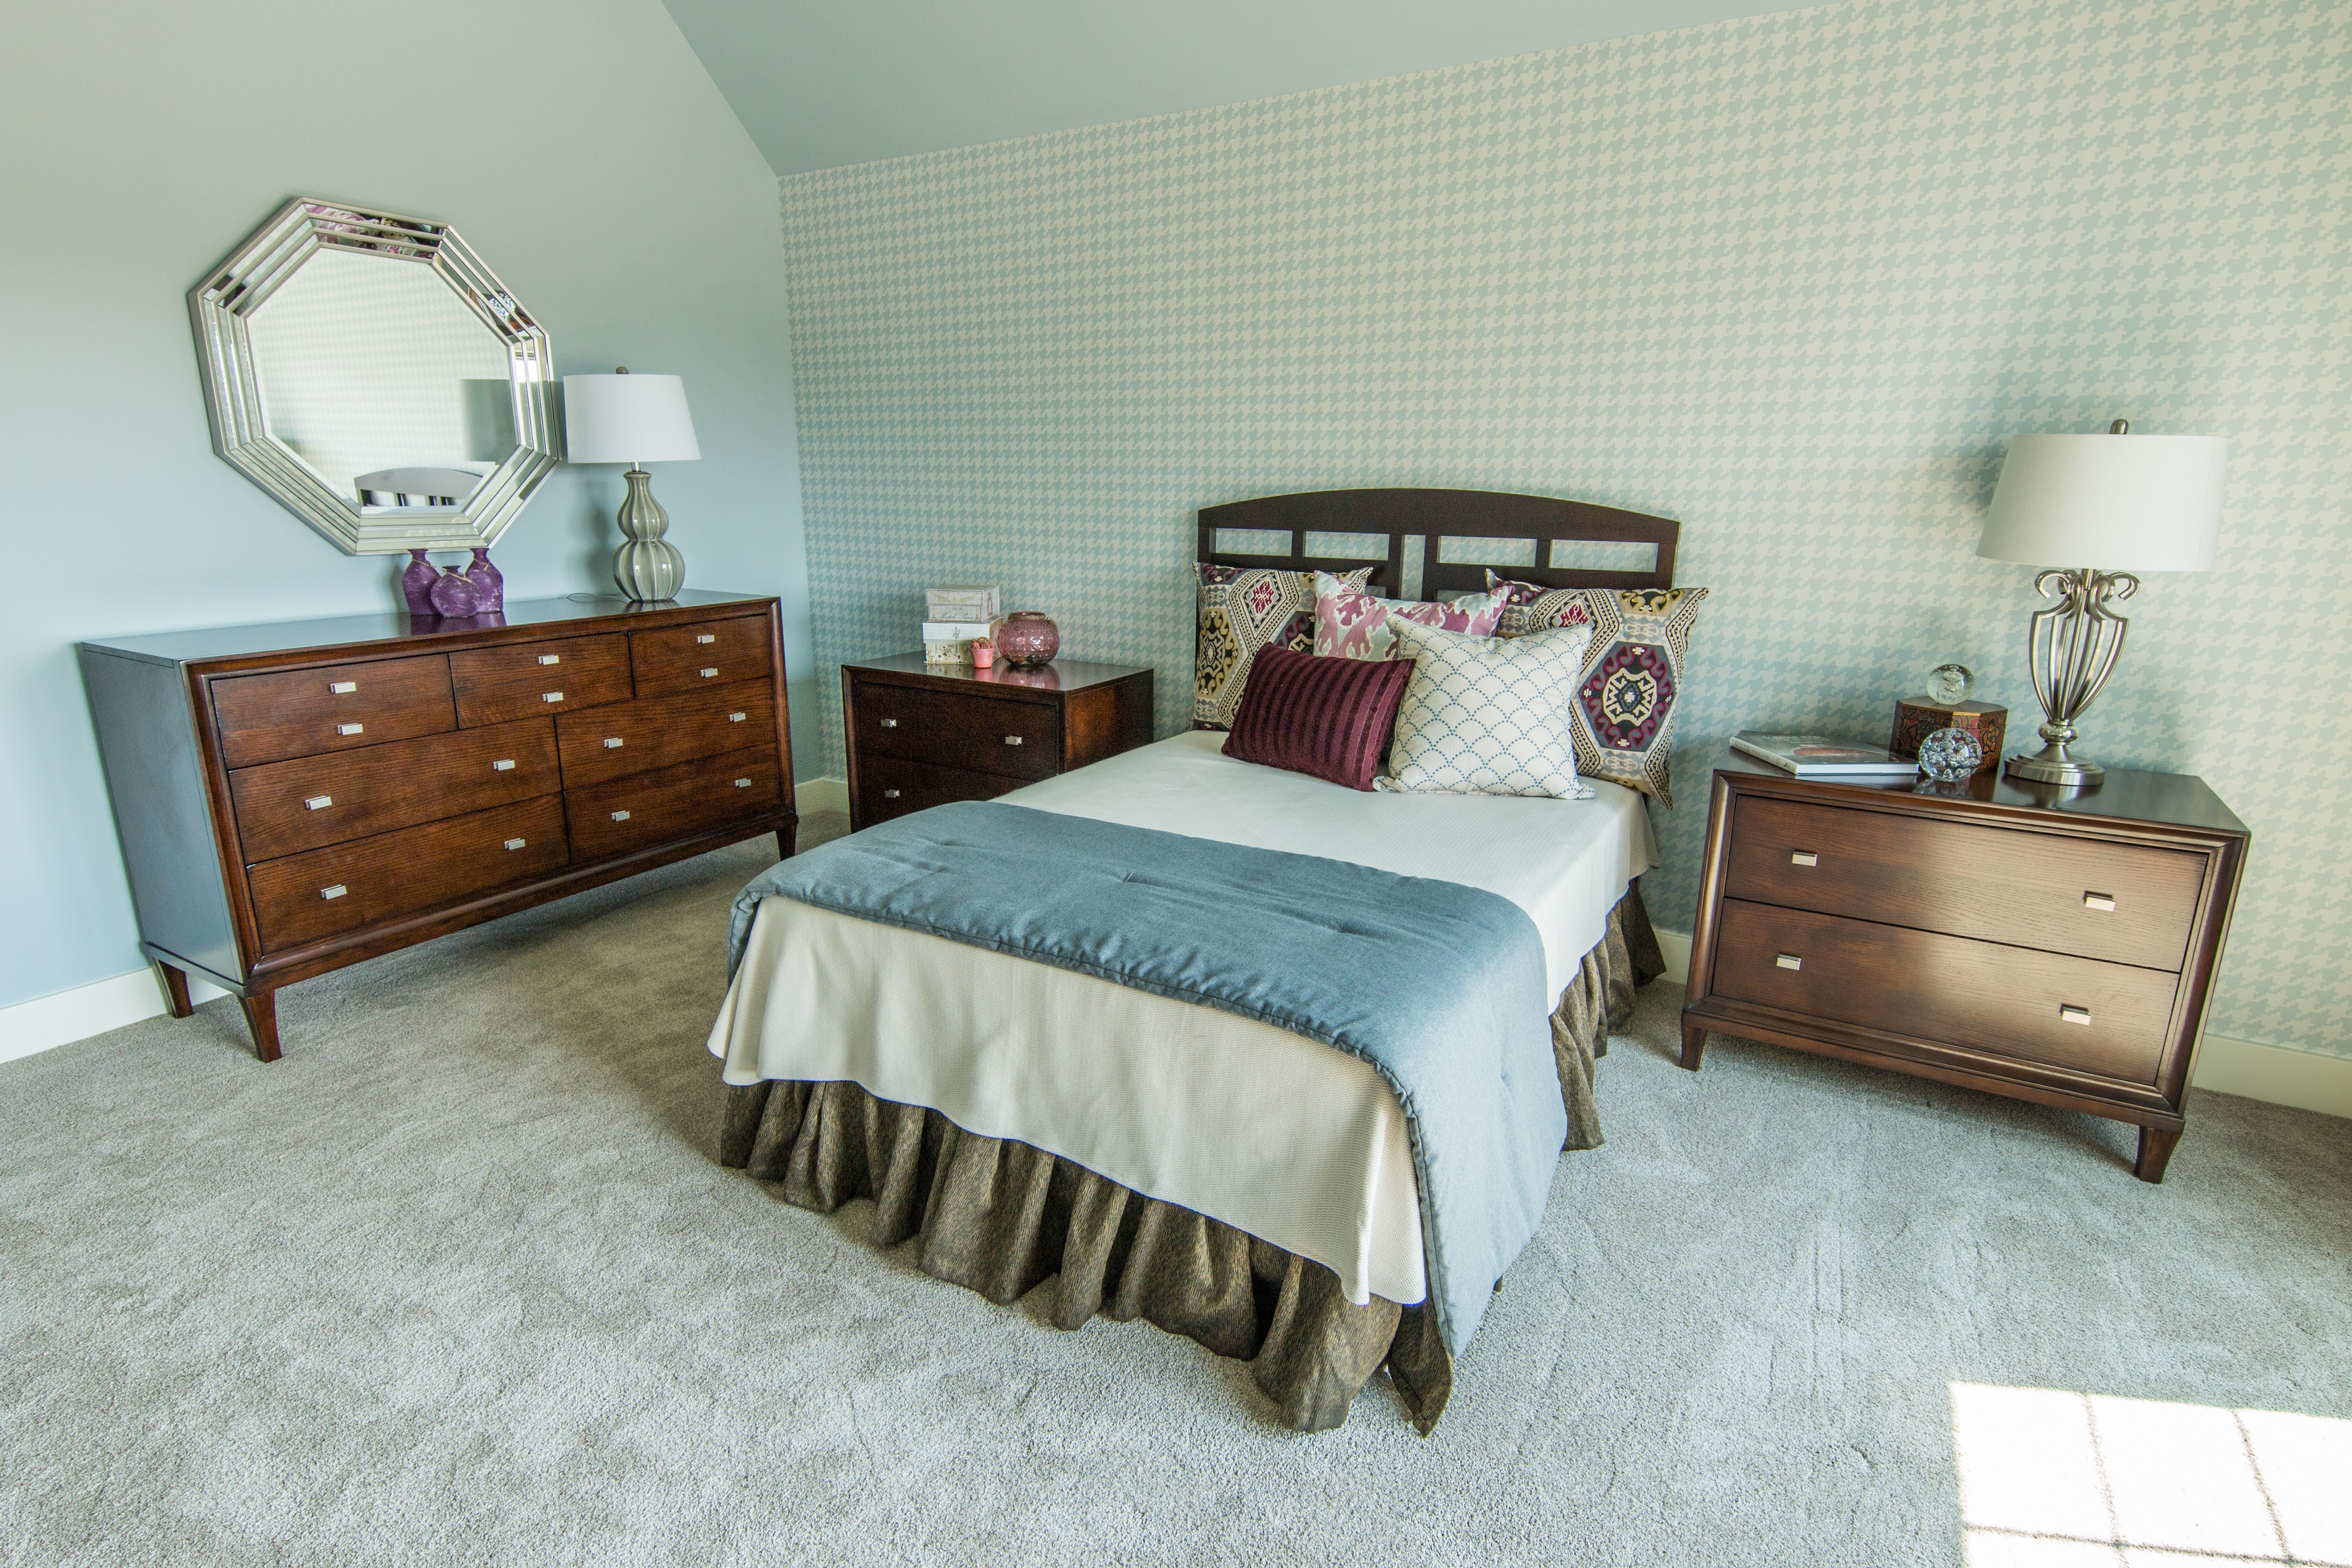 Guest bedroom with dark wood furniture and wallpaper behind bed